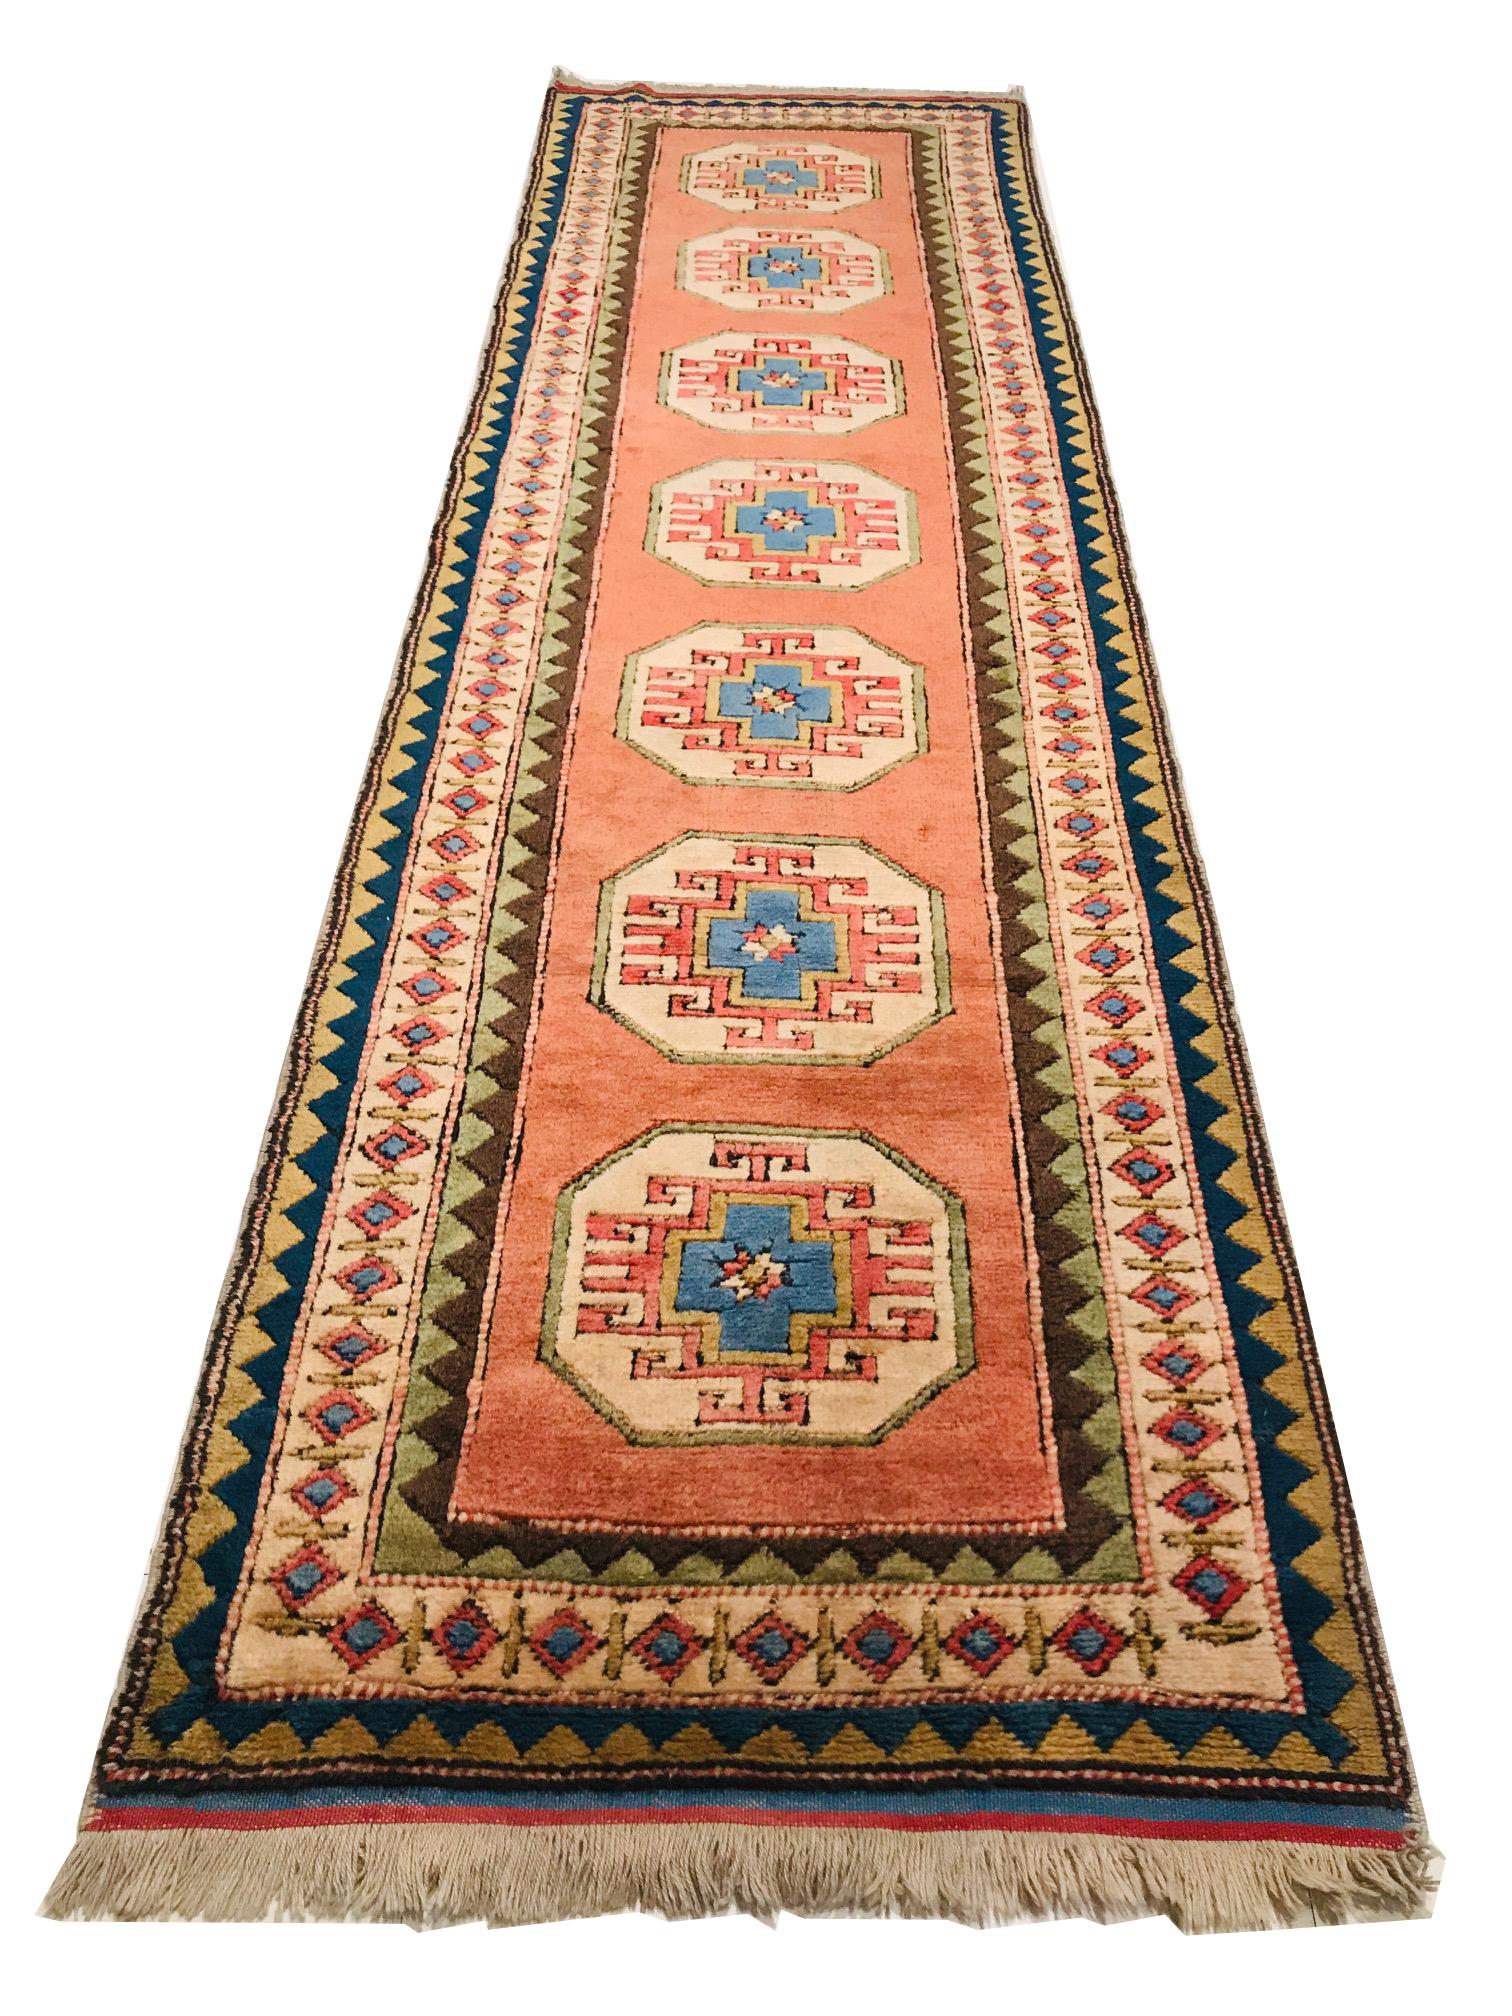 This Turkey runner rug is from the 1980s, hand knotted with wool.
This runner carpet has typical geometric drawings of this period, a combination of colors such as orange, black, blue, brown, olive green and beige that makes it a perfect piece to